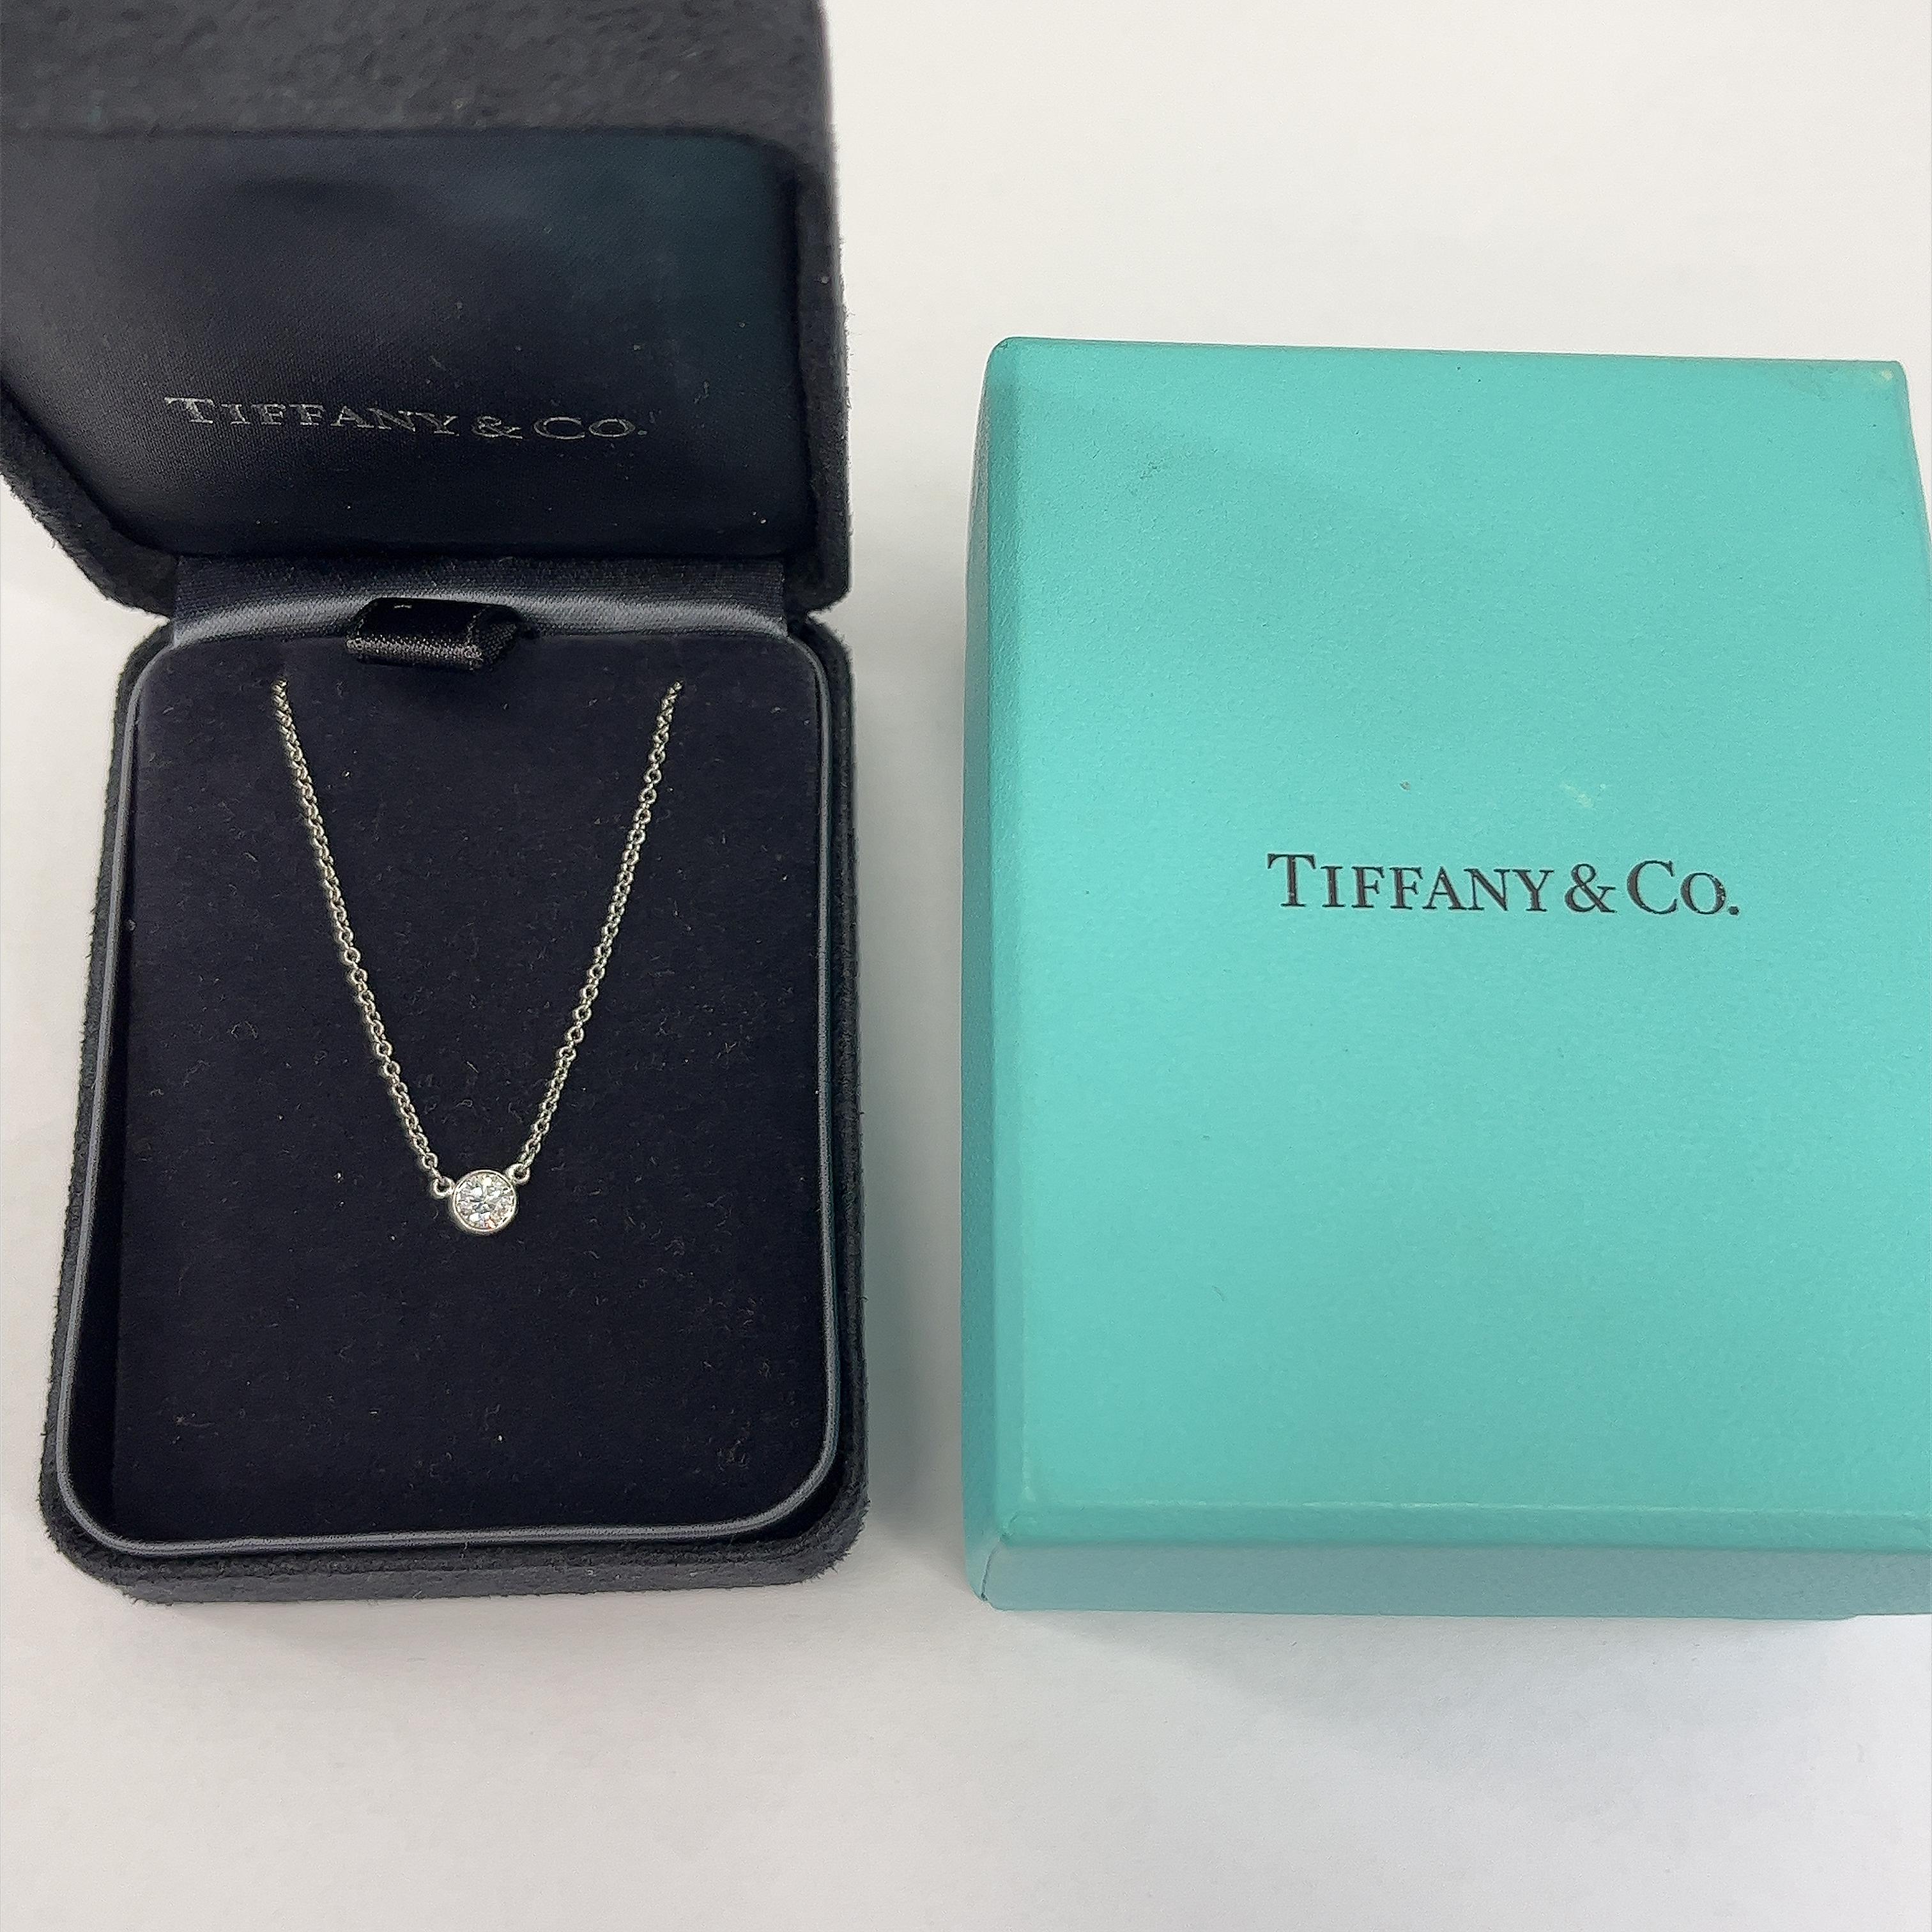 This Tiffany & Co diamonds by the Yard Single diamond
necklace is designed to hold the pendant at the center of the chest,
set with 1 round brilliant cut diamond 0.25ct G/VS1
making it a very elegant and beautiful piece of jewellery. 

Total Diamond